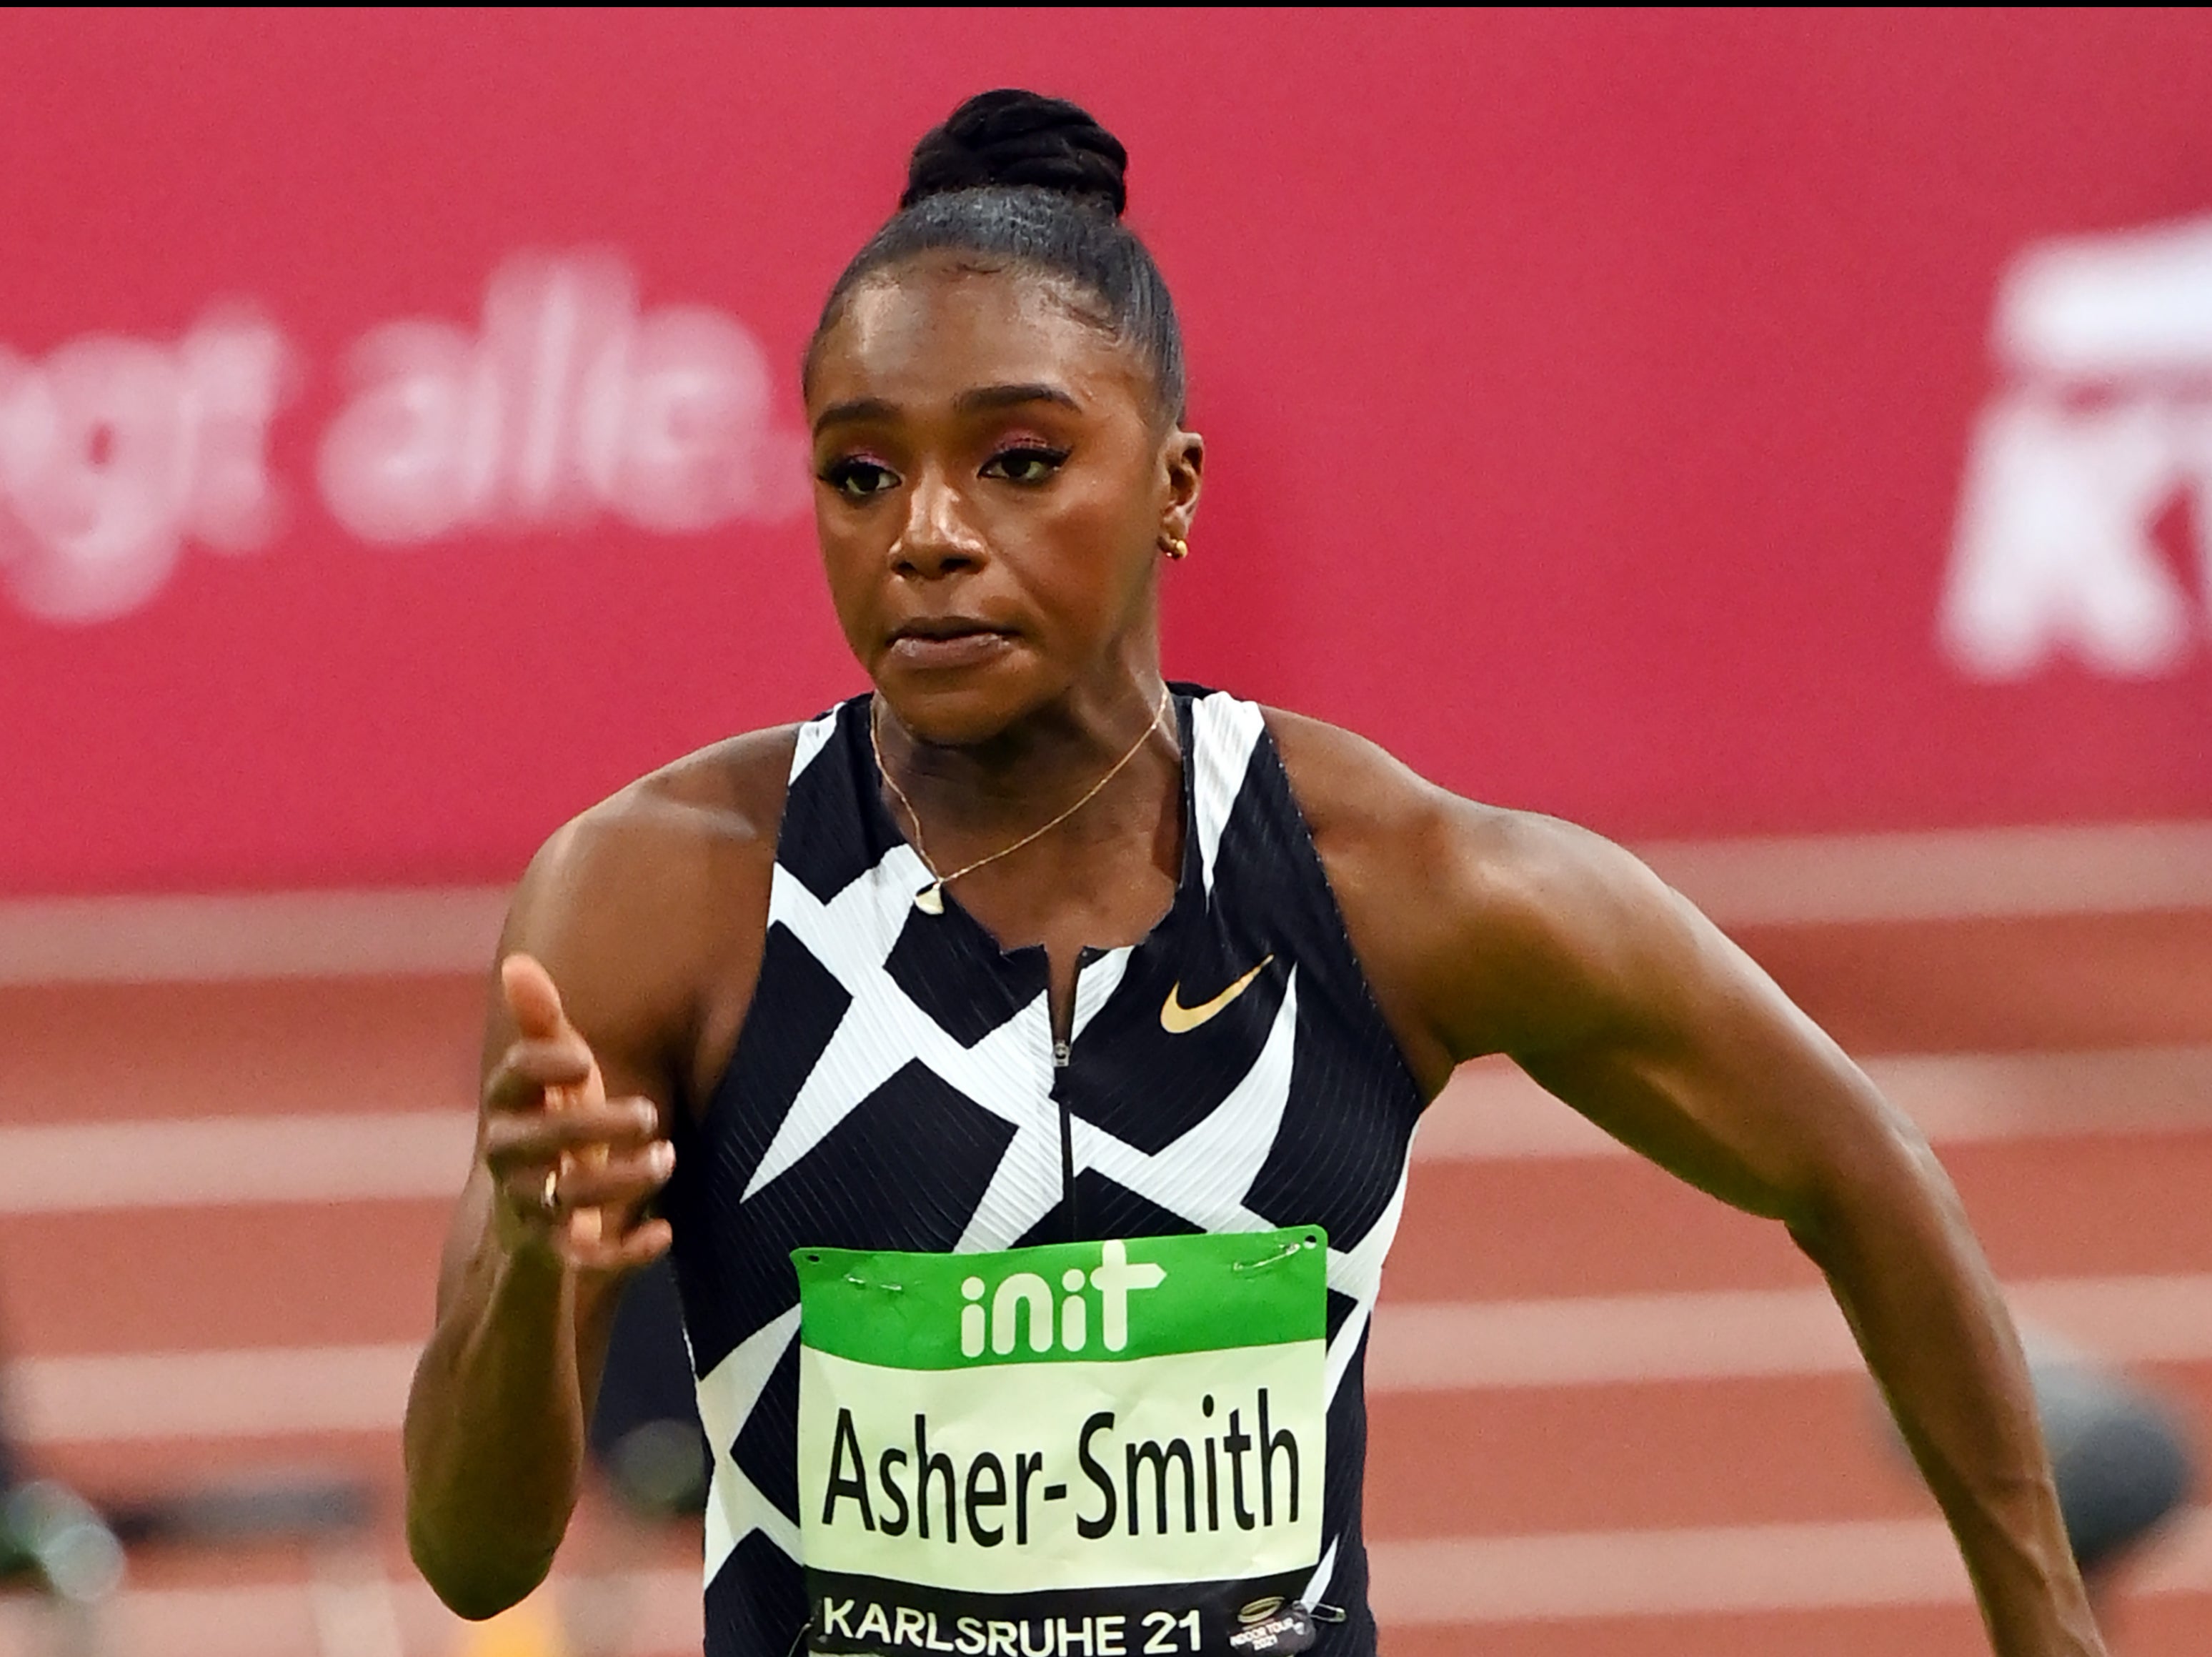 Asher-Smith was 0.02 seconds off the British record